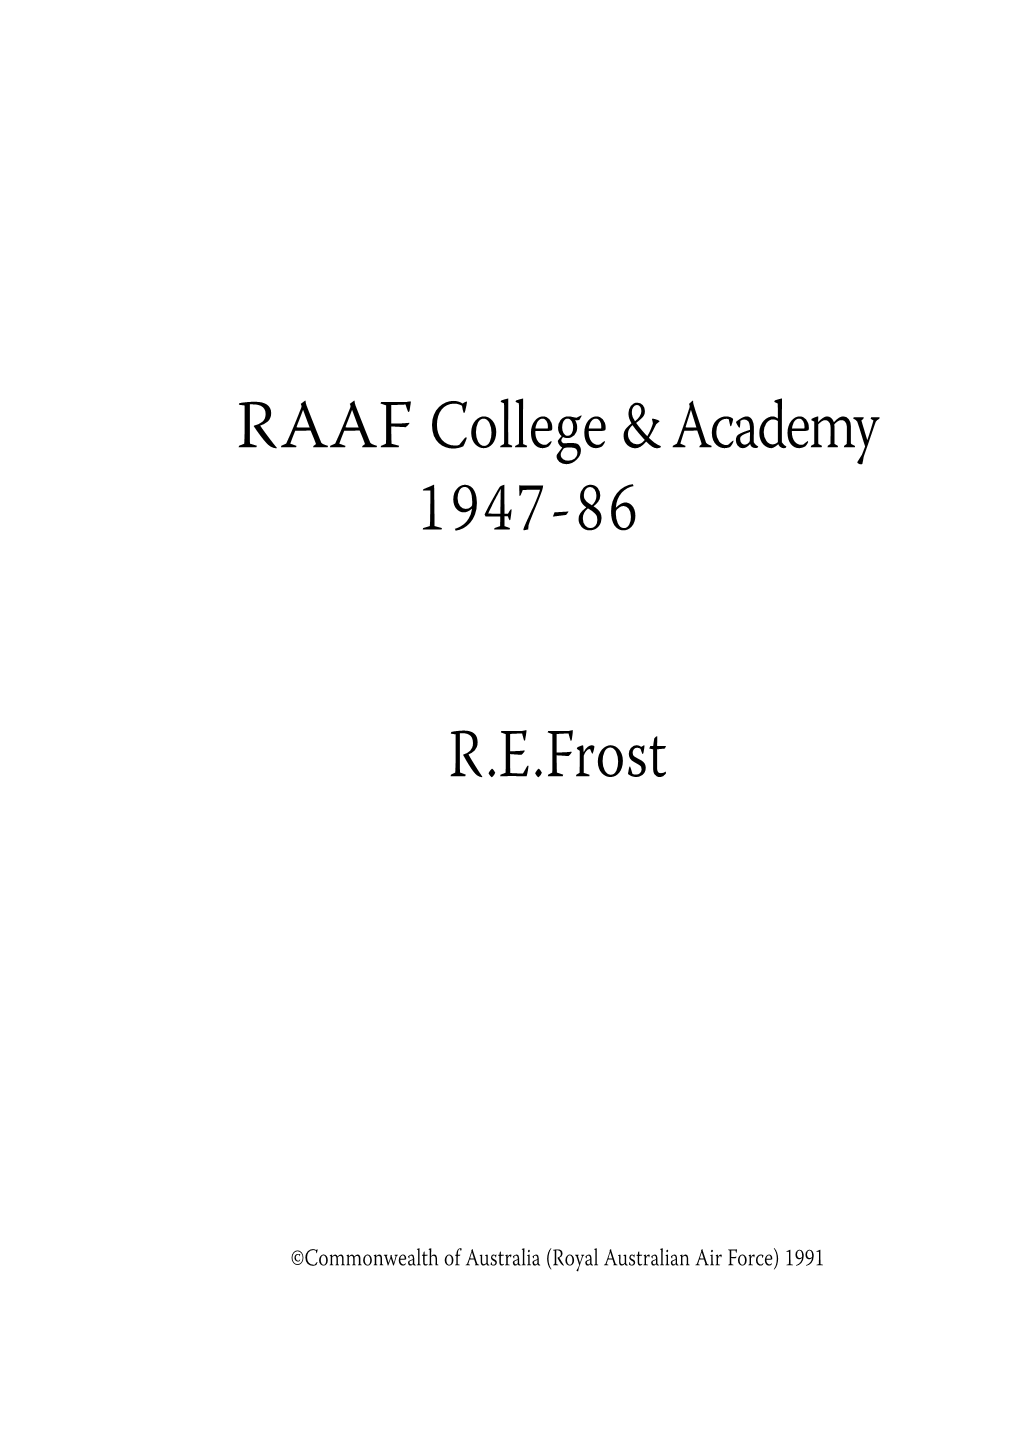 RAAF College & Academy 1947-86 R.E.Frost